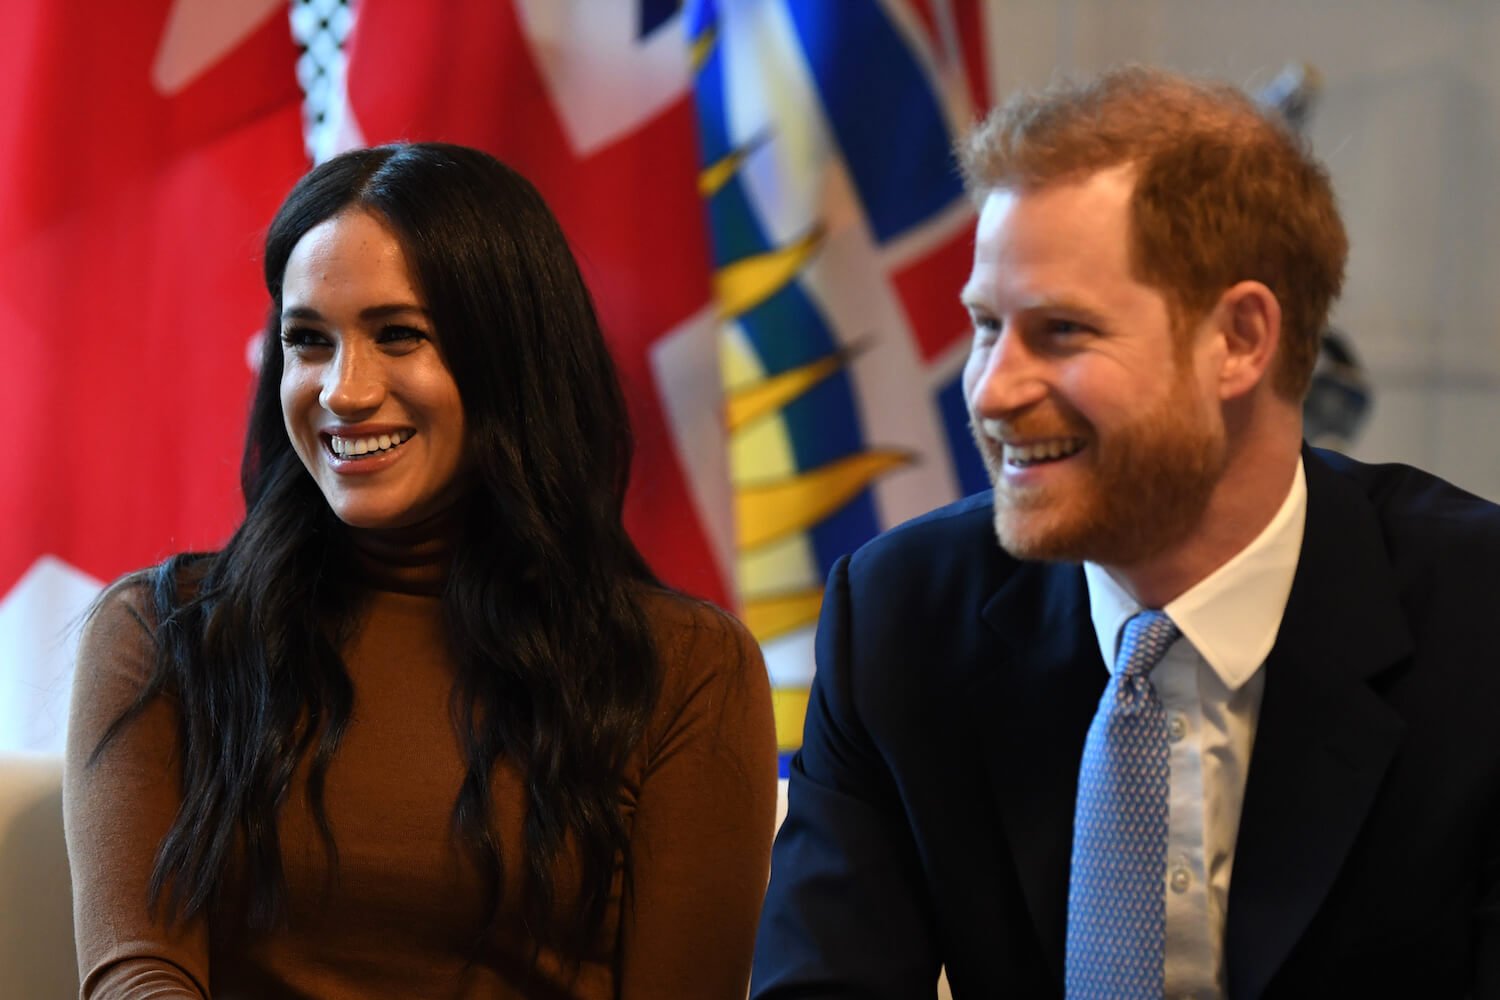 Prince Harry and Meghan Markle Have an ‘Opportunity to Control Their Image’ With Coronation Attendance, Expert Says